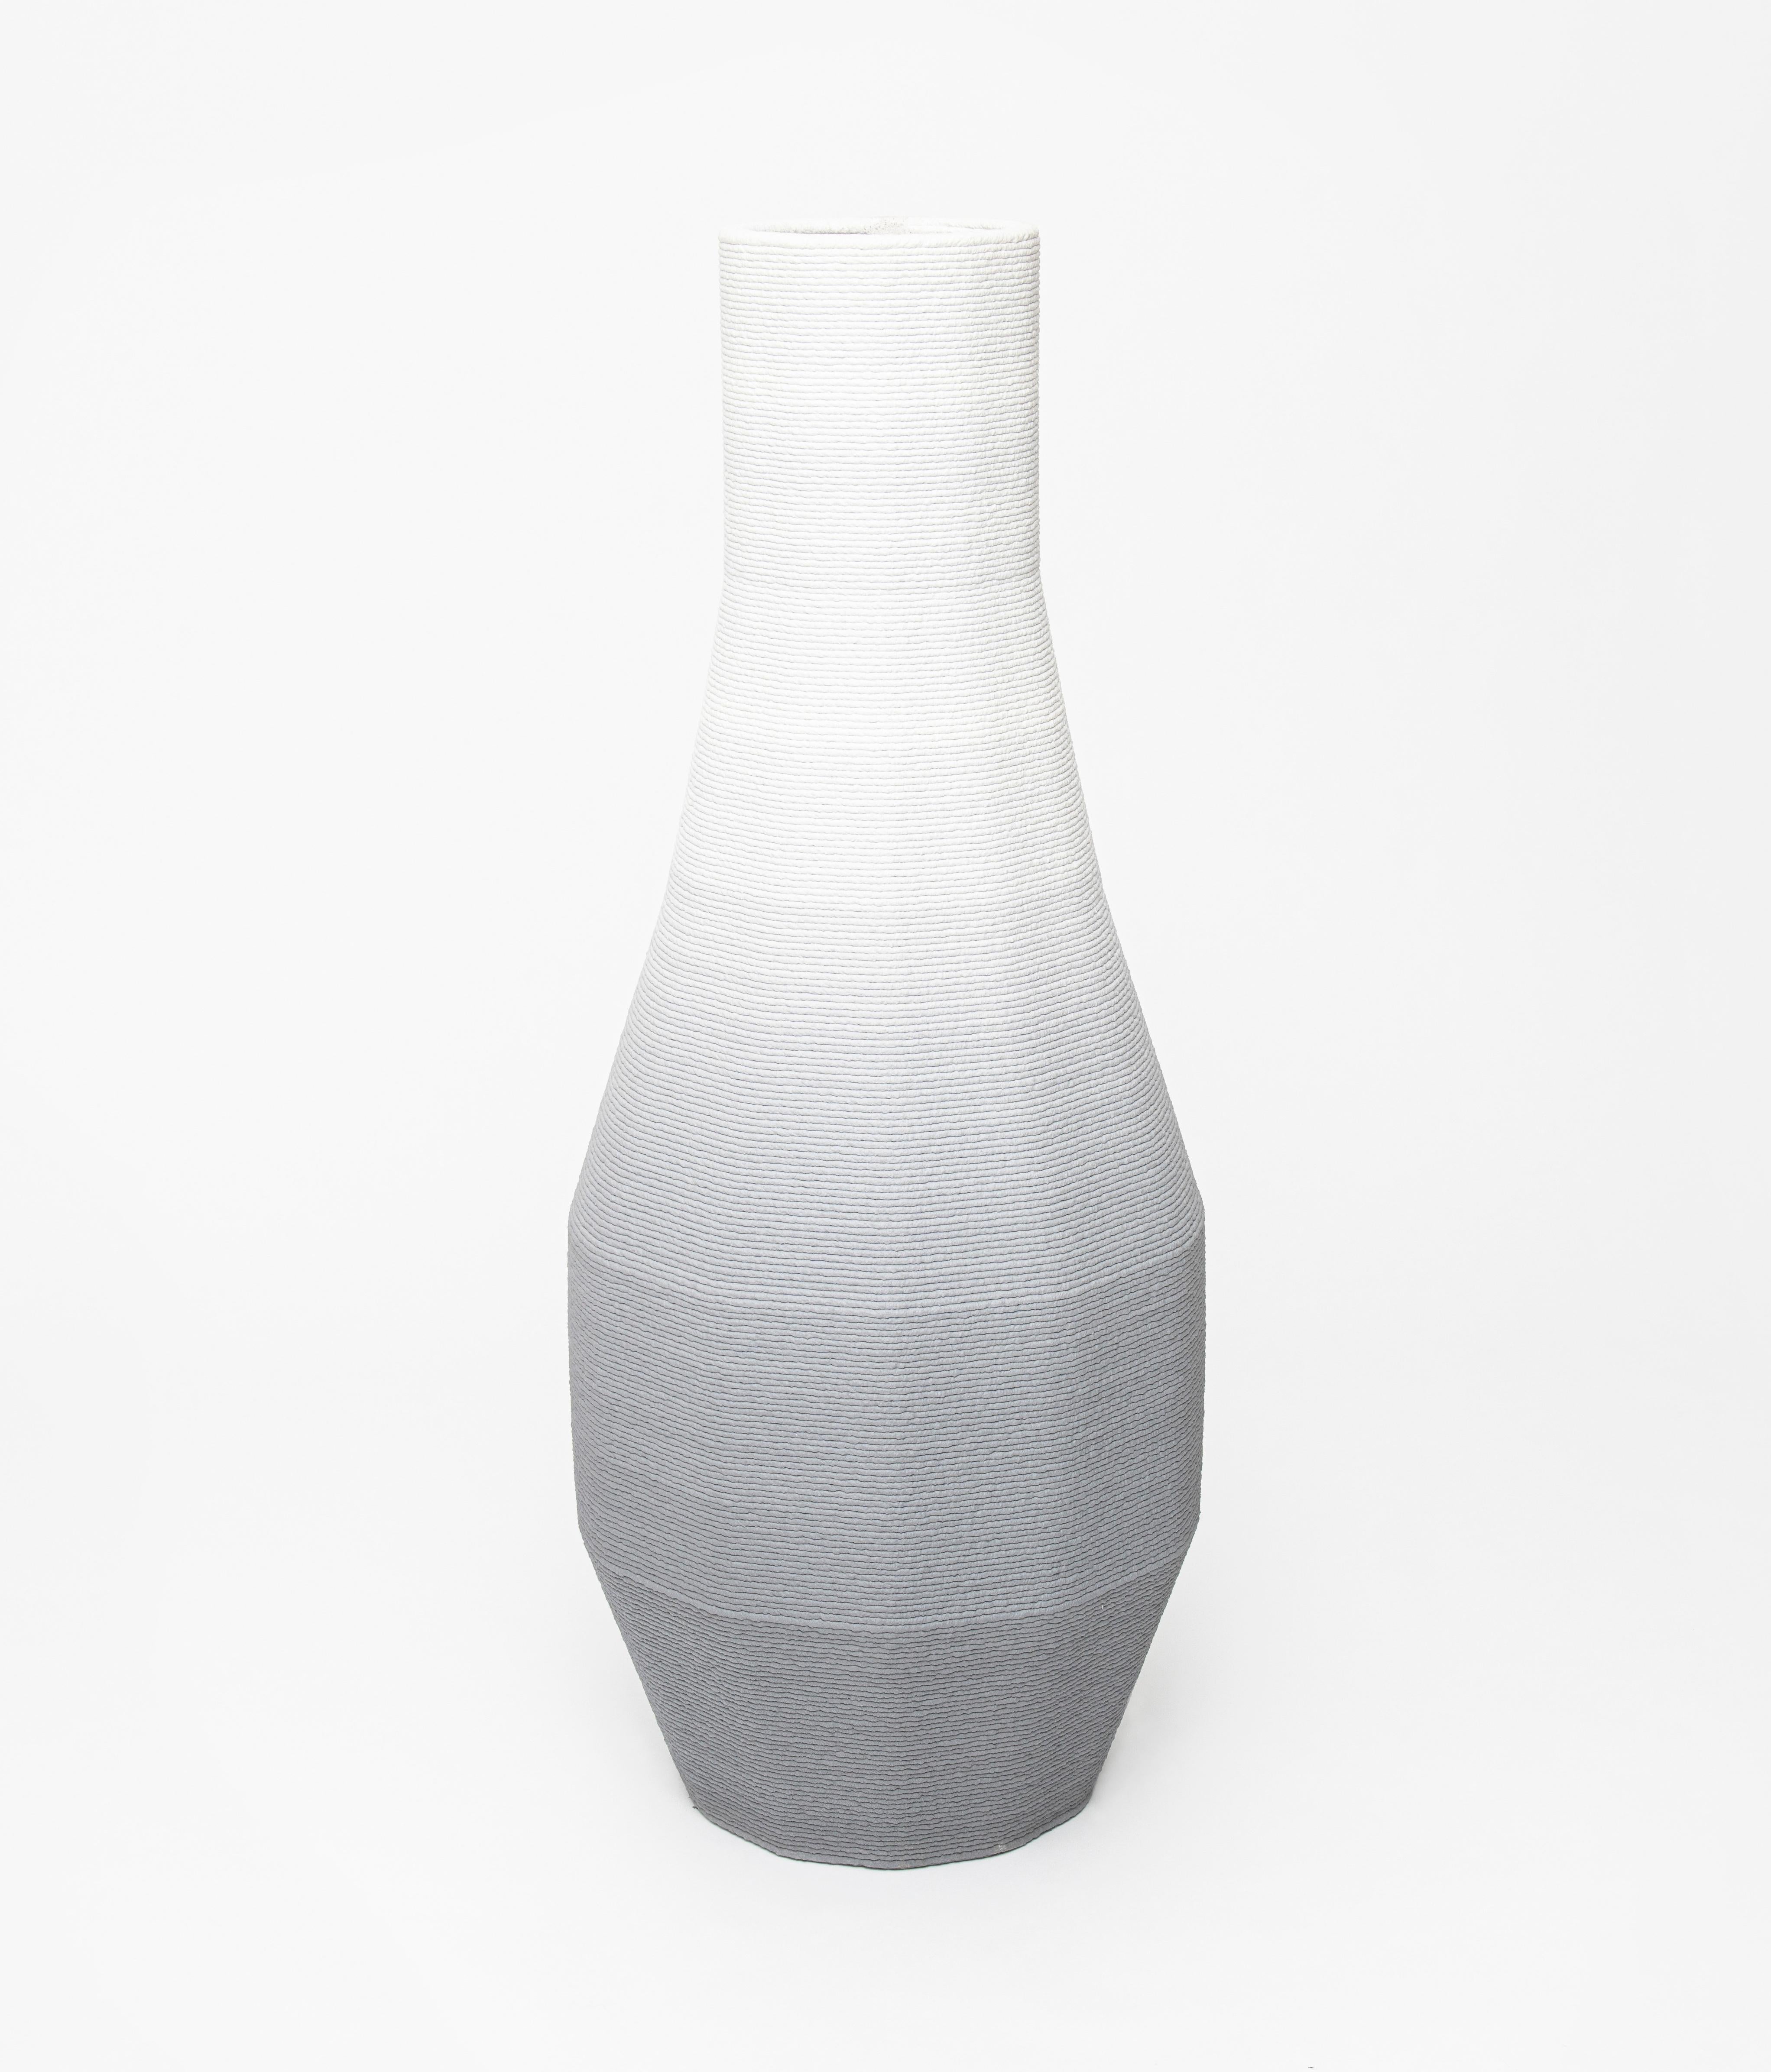 Set of 3 Large Concrete Gradient Vase by Philipp Aduatz In New Condition For Sale In Geneve, CH